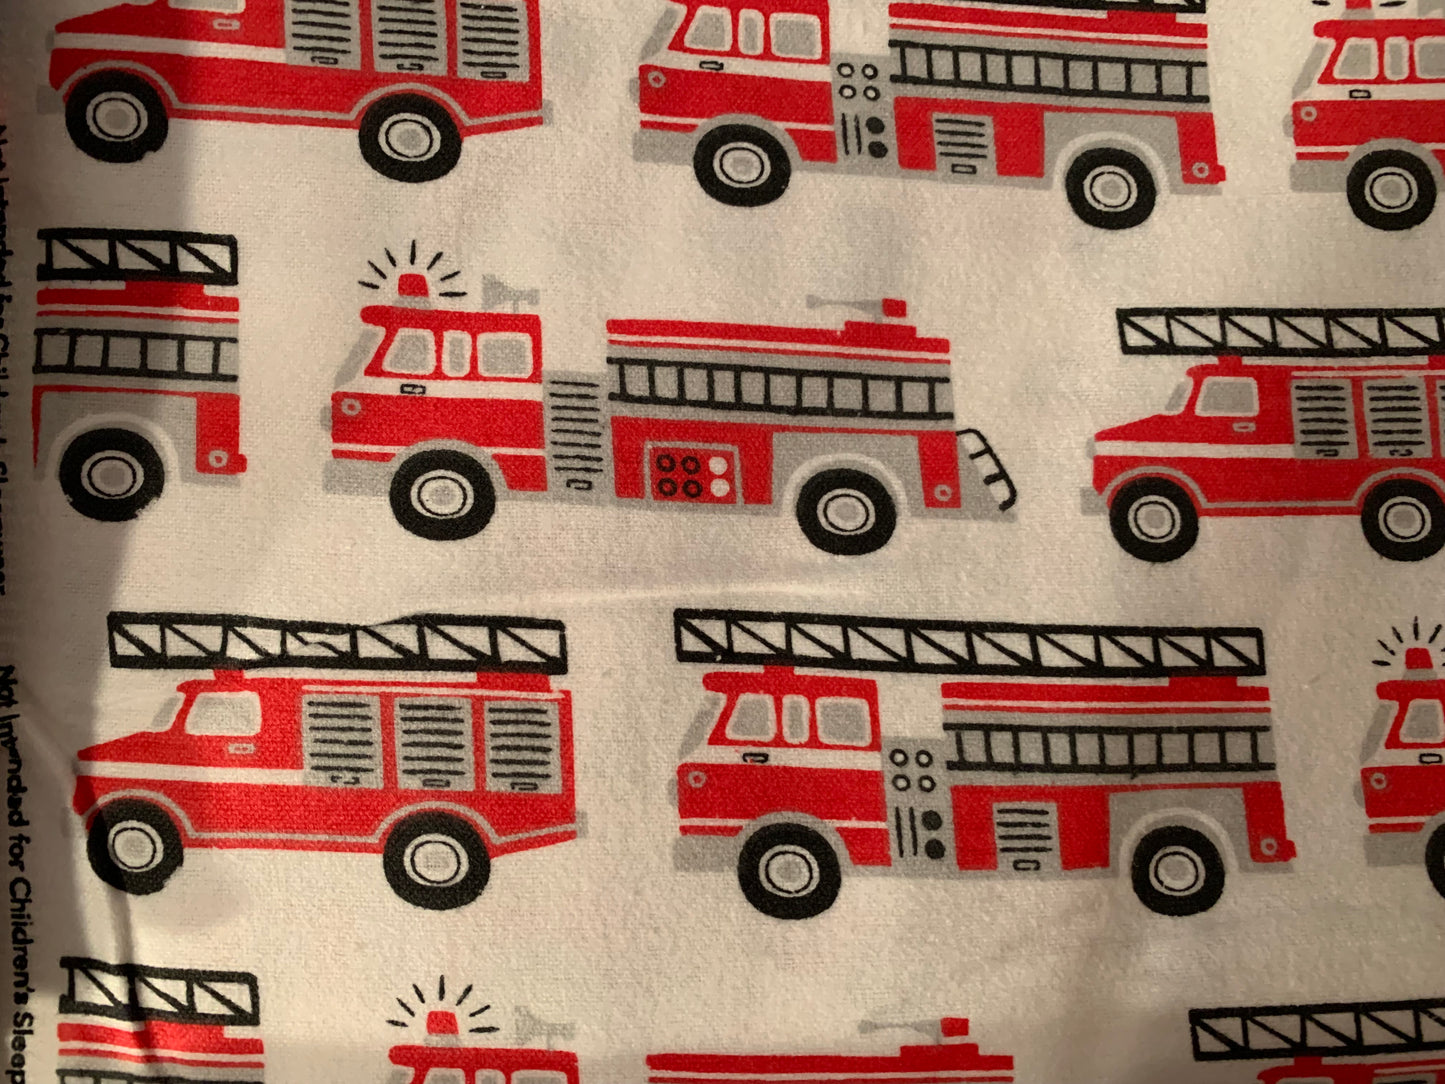 Weighted blanket, twin with 10 lbs, monster trucks, firetrucks, construction vehicles, spaceships, rockets, gaming, dogs, washable flannel